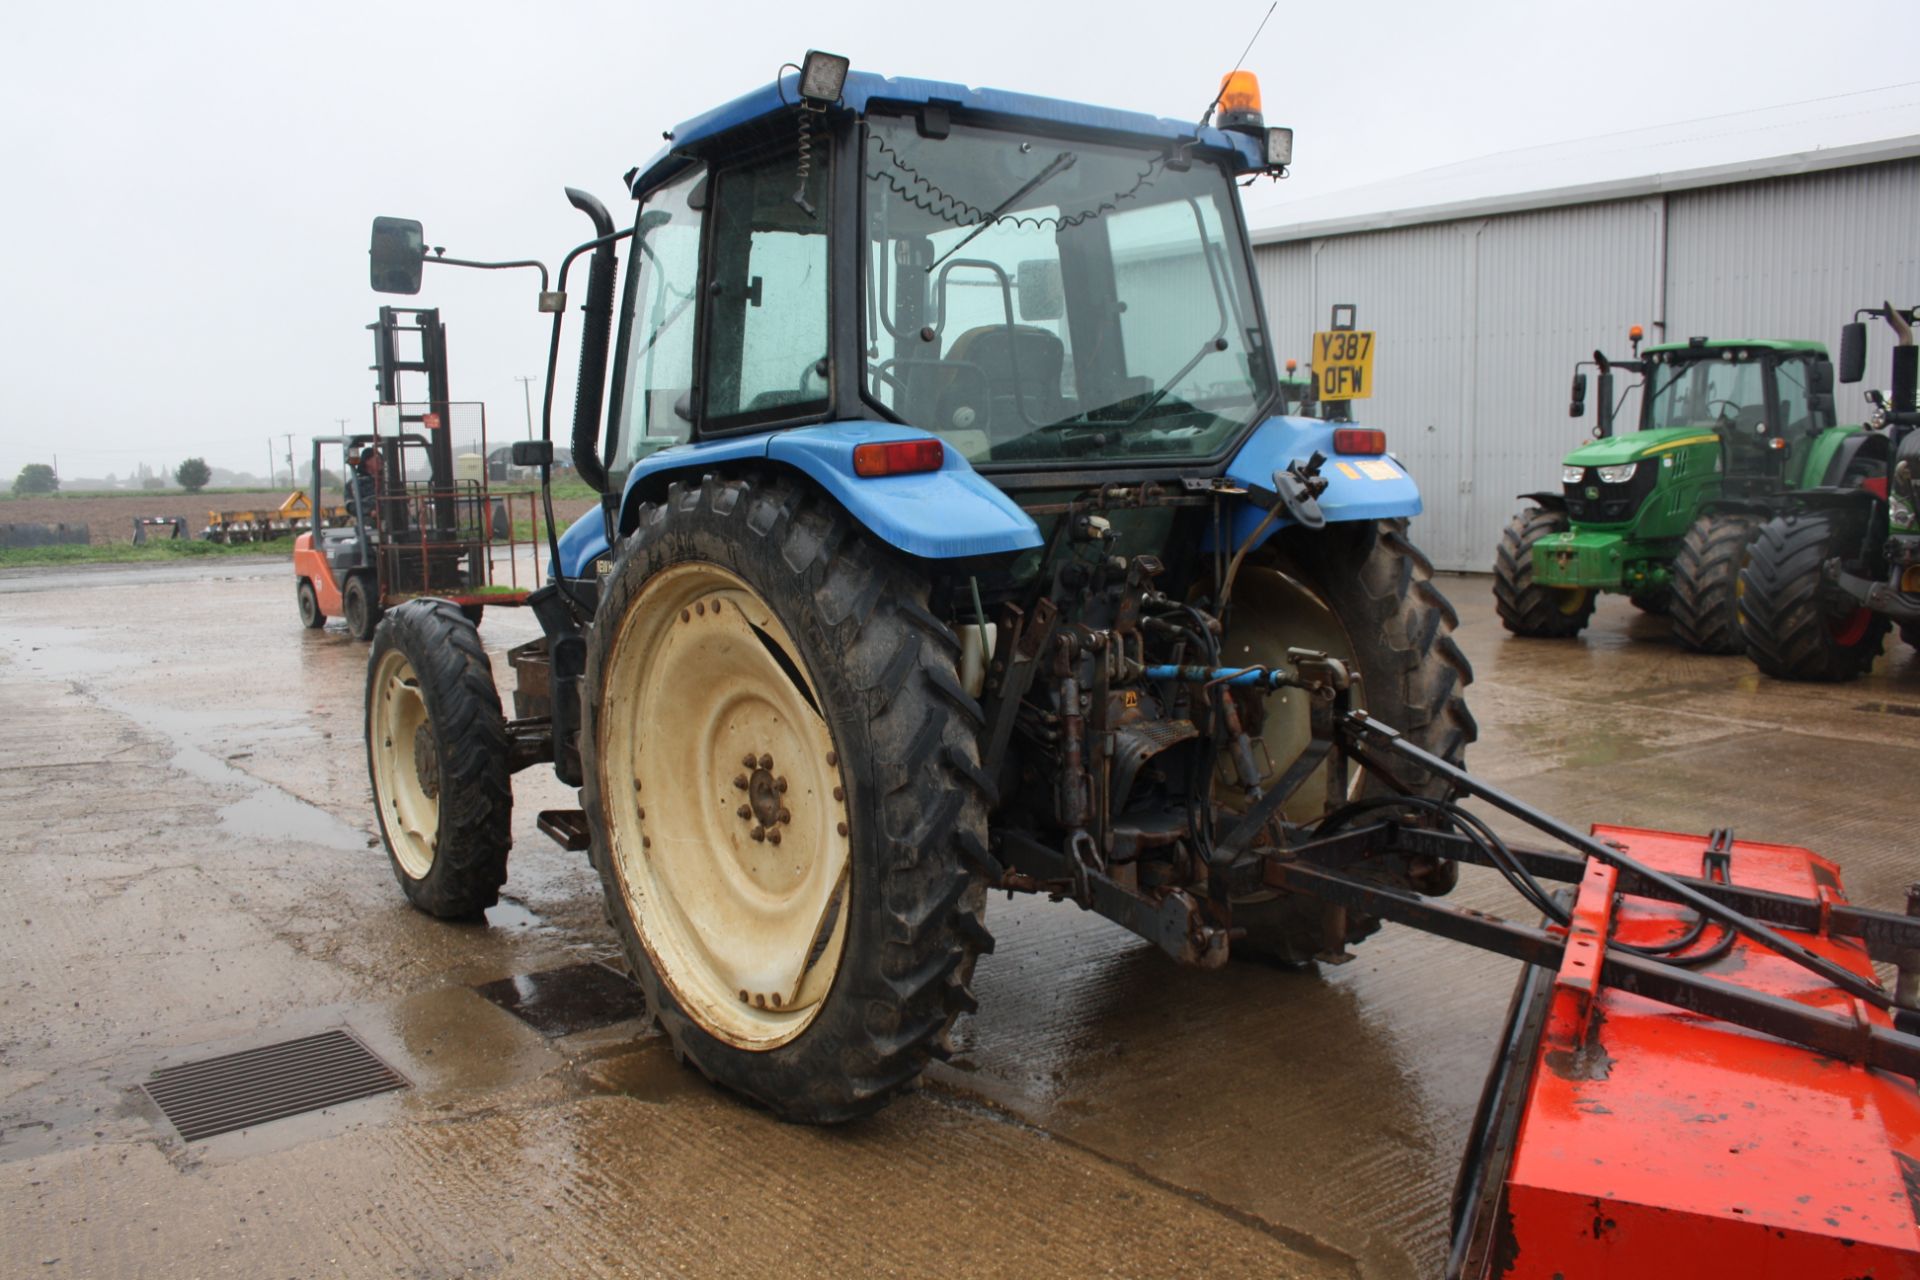 Ford New Holland TL100, 4wd Tractor, Reg Y387 0FW 6,940 hours, 3 speed PTO, Tyres - Rear: - Image 4 of 4